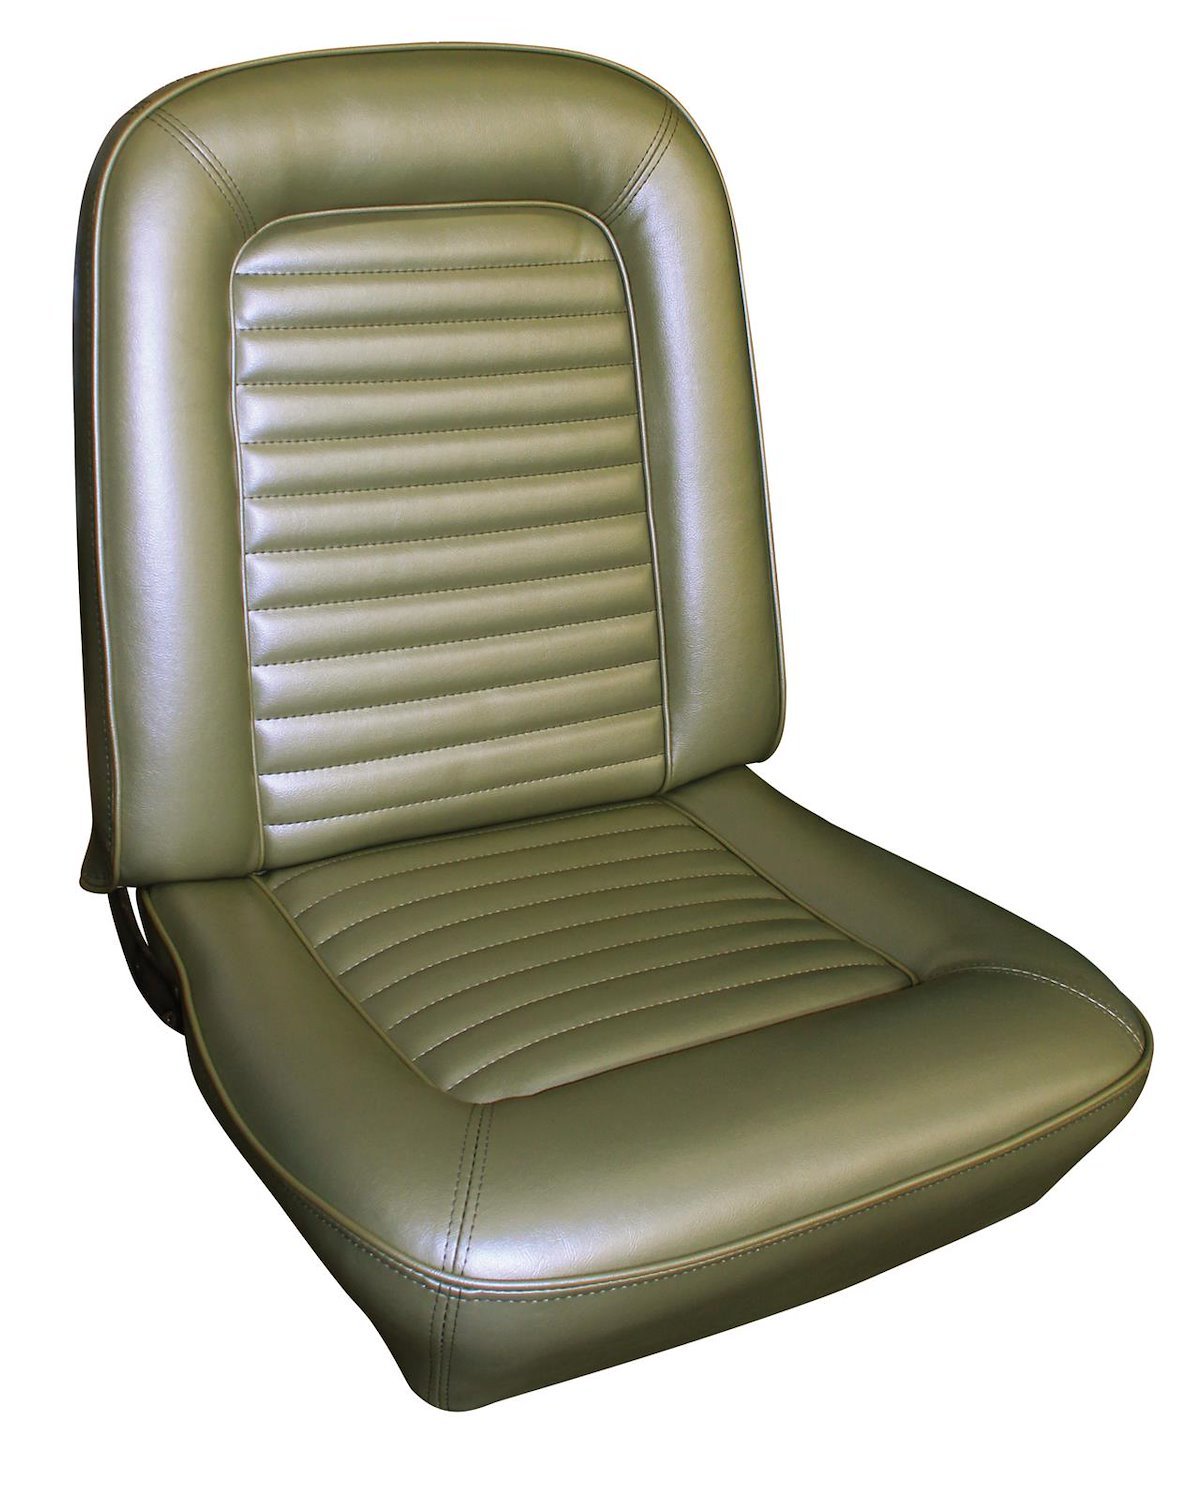 1971-1973 Ford Mustang Deluxe and Grande Interior Front Bucket Seat Upholstery Set